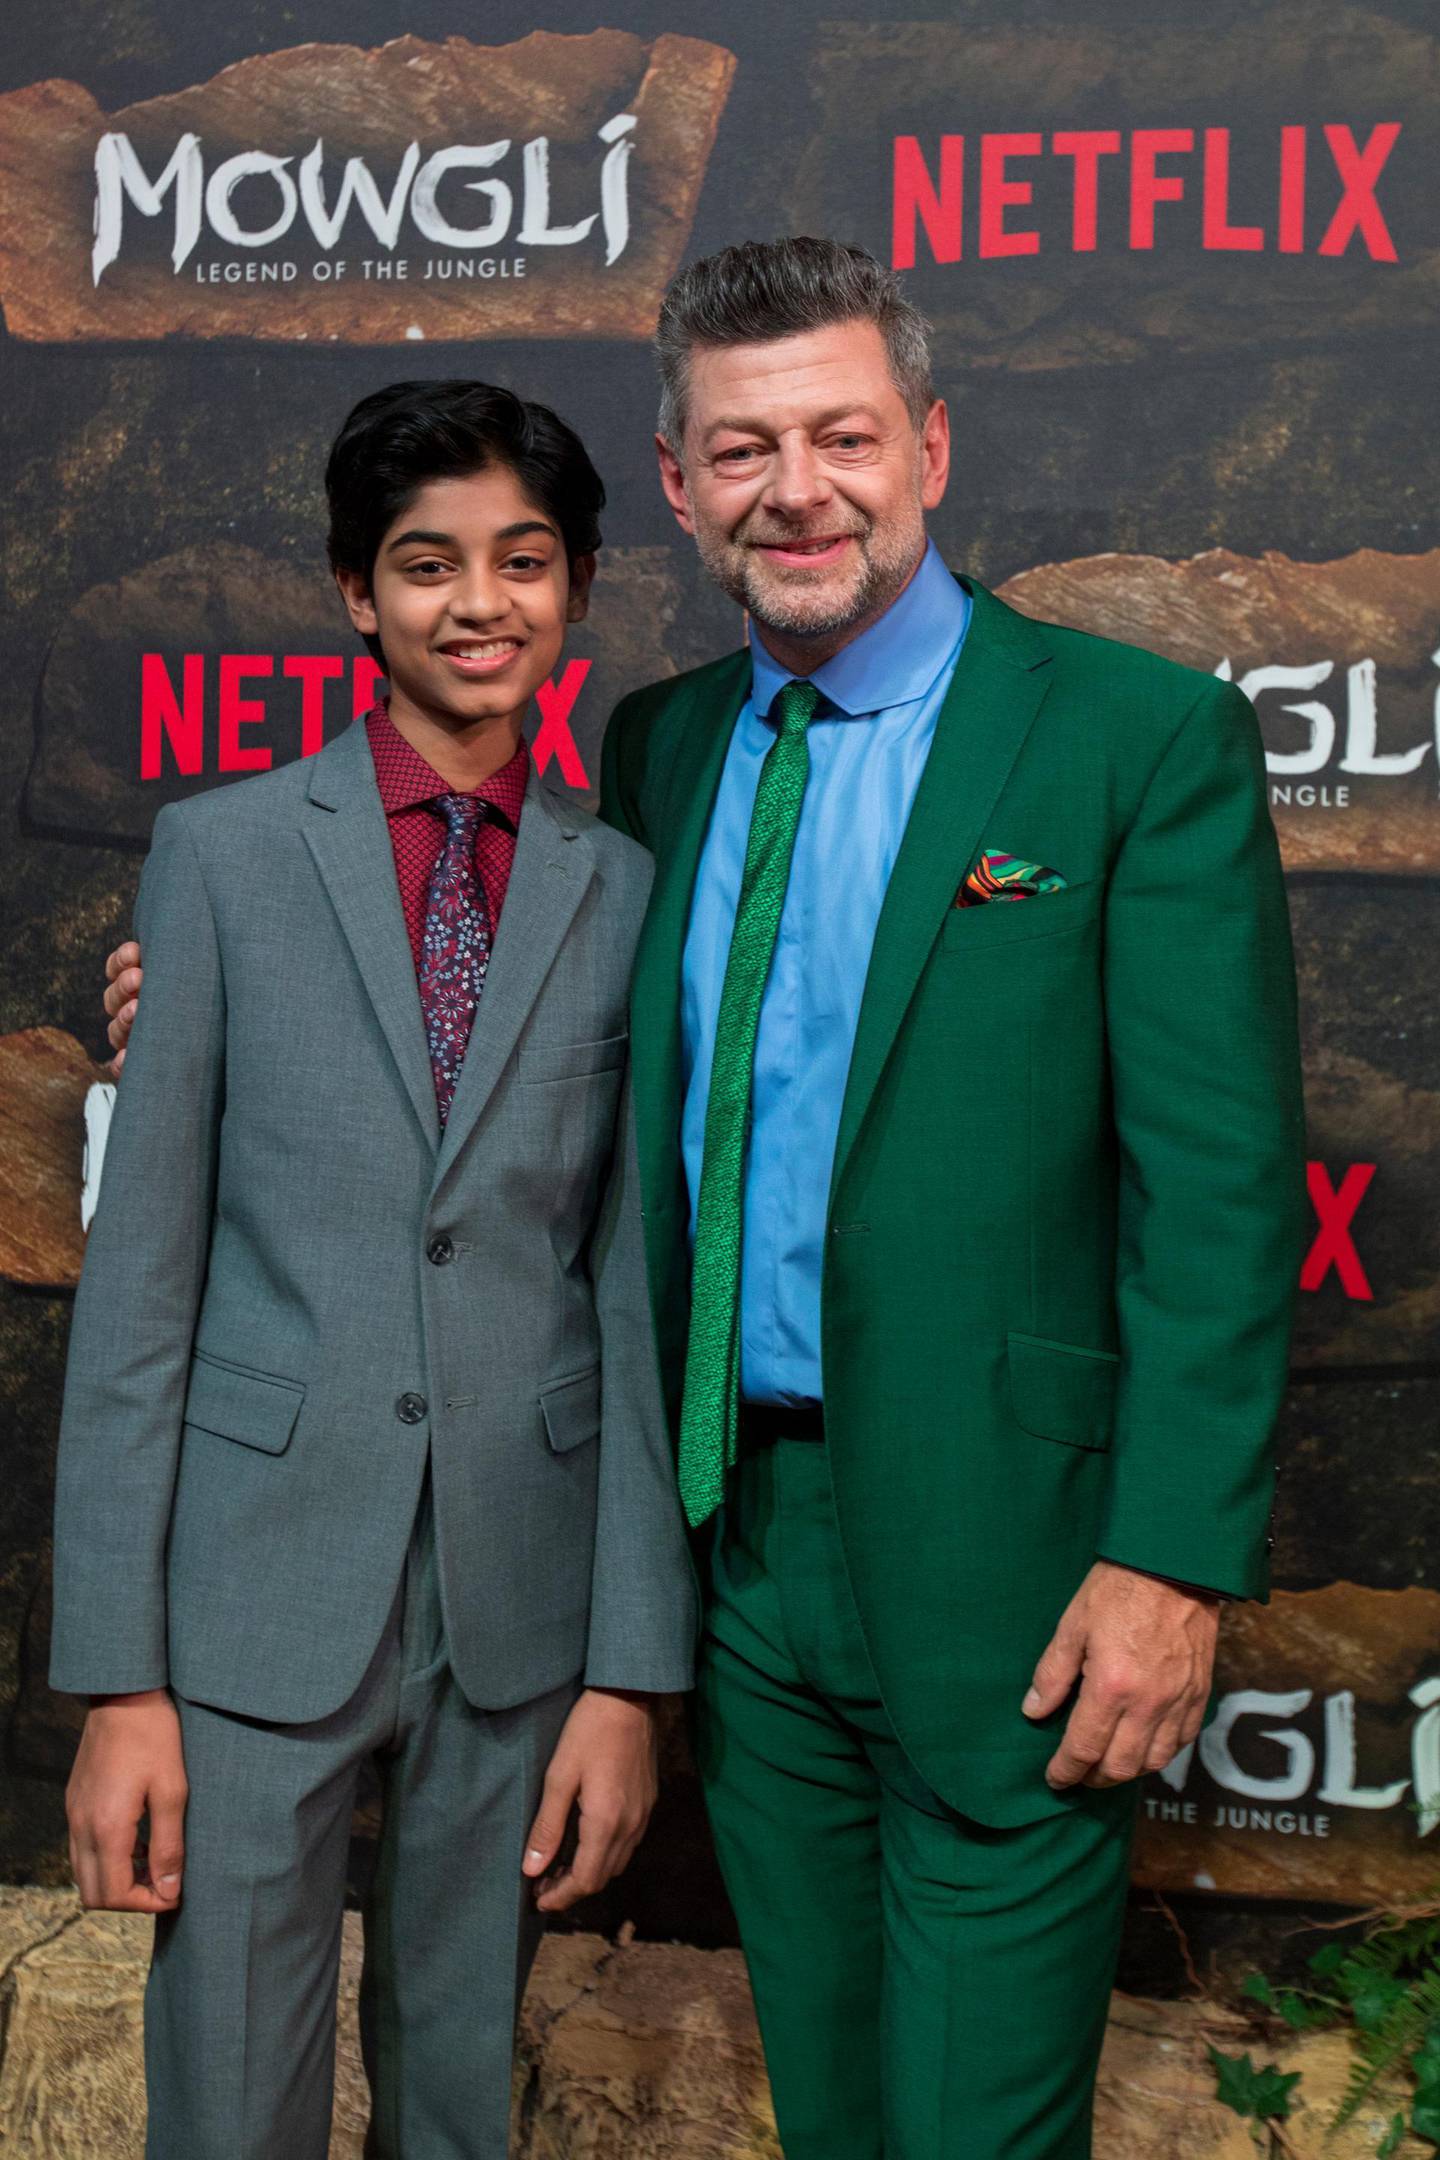 MUMBAI, INDIA - NOVEMBER 25: In this handout image provided by NETFLIX,  Rohan Chand and Andy Serkis attends the Mowgli World Premiere on November 25, 2018 in Mumbai, India. (Photo by Ritam Banerjee/Netflix via Getty Images)